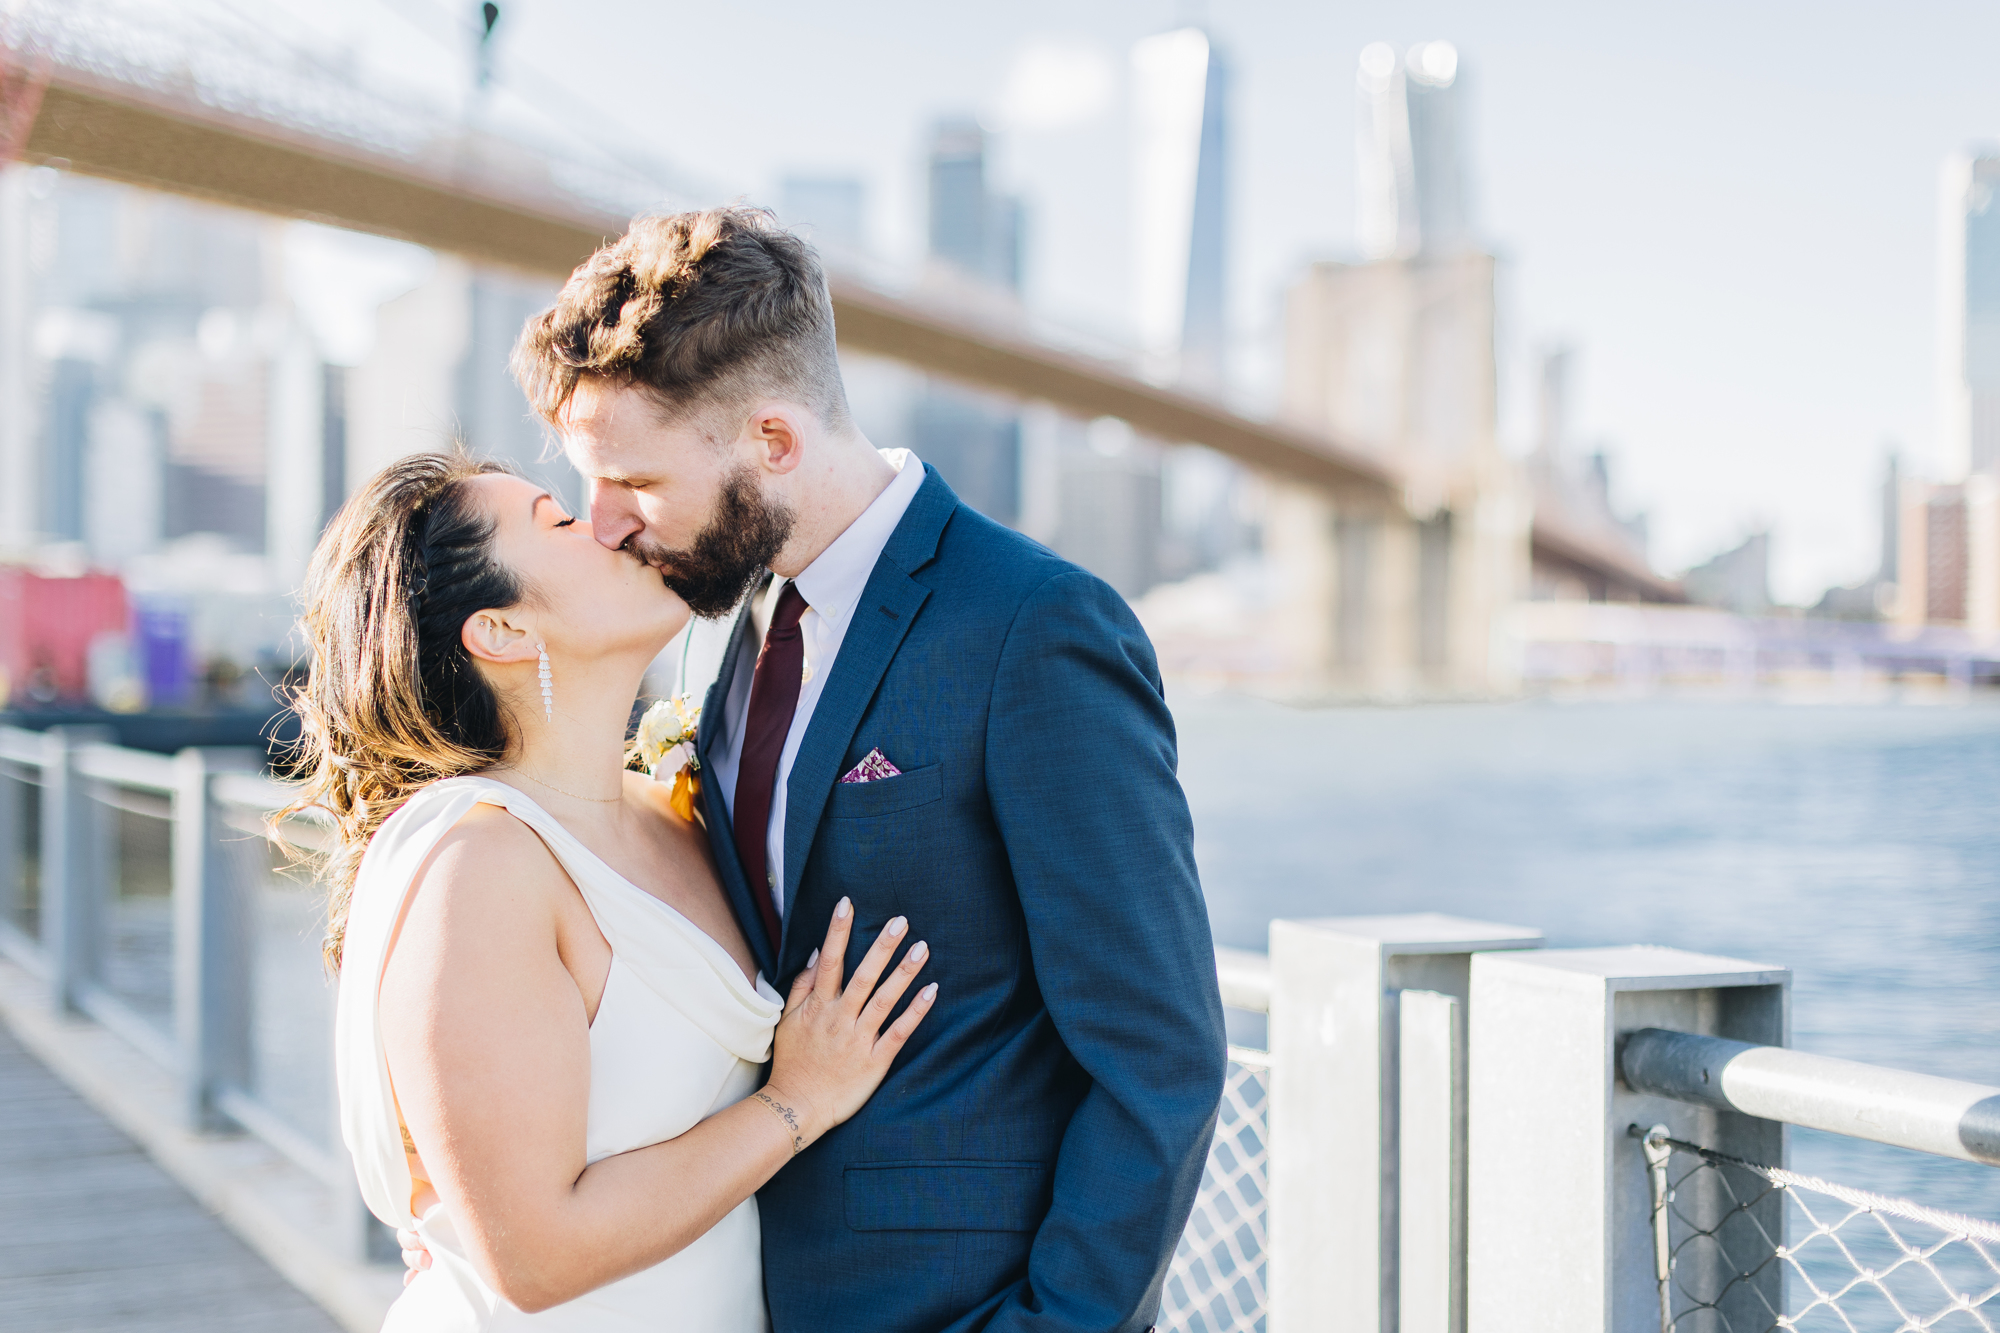 Light Fall DUMBO Elopement with New York views and foliage